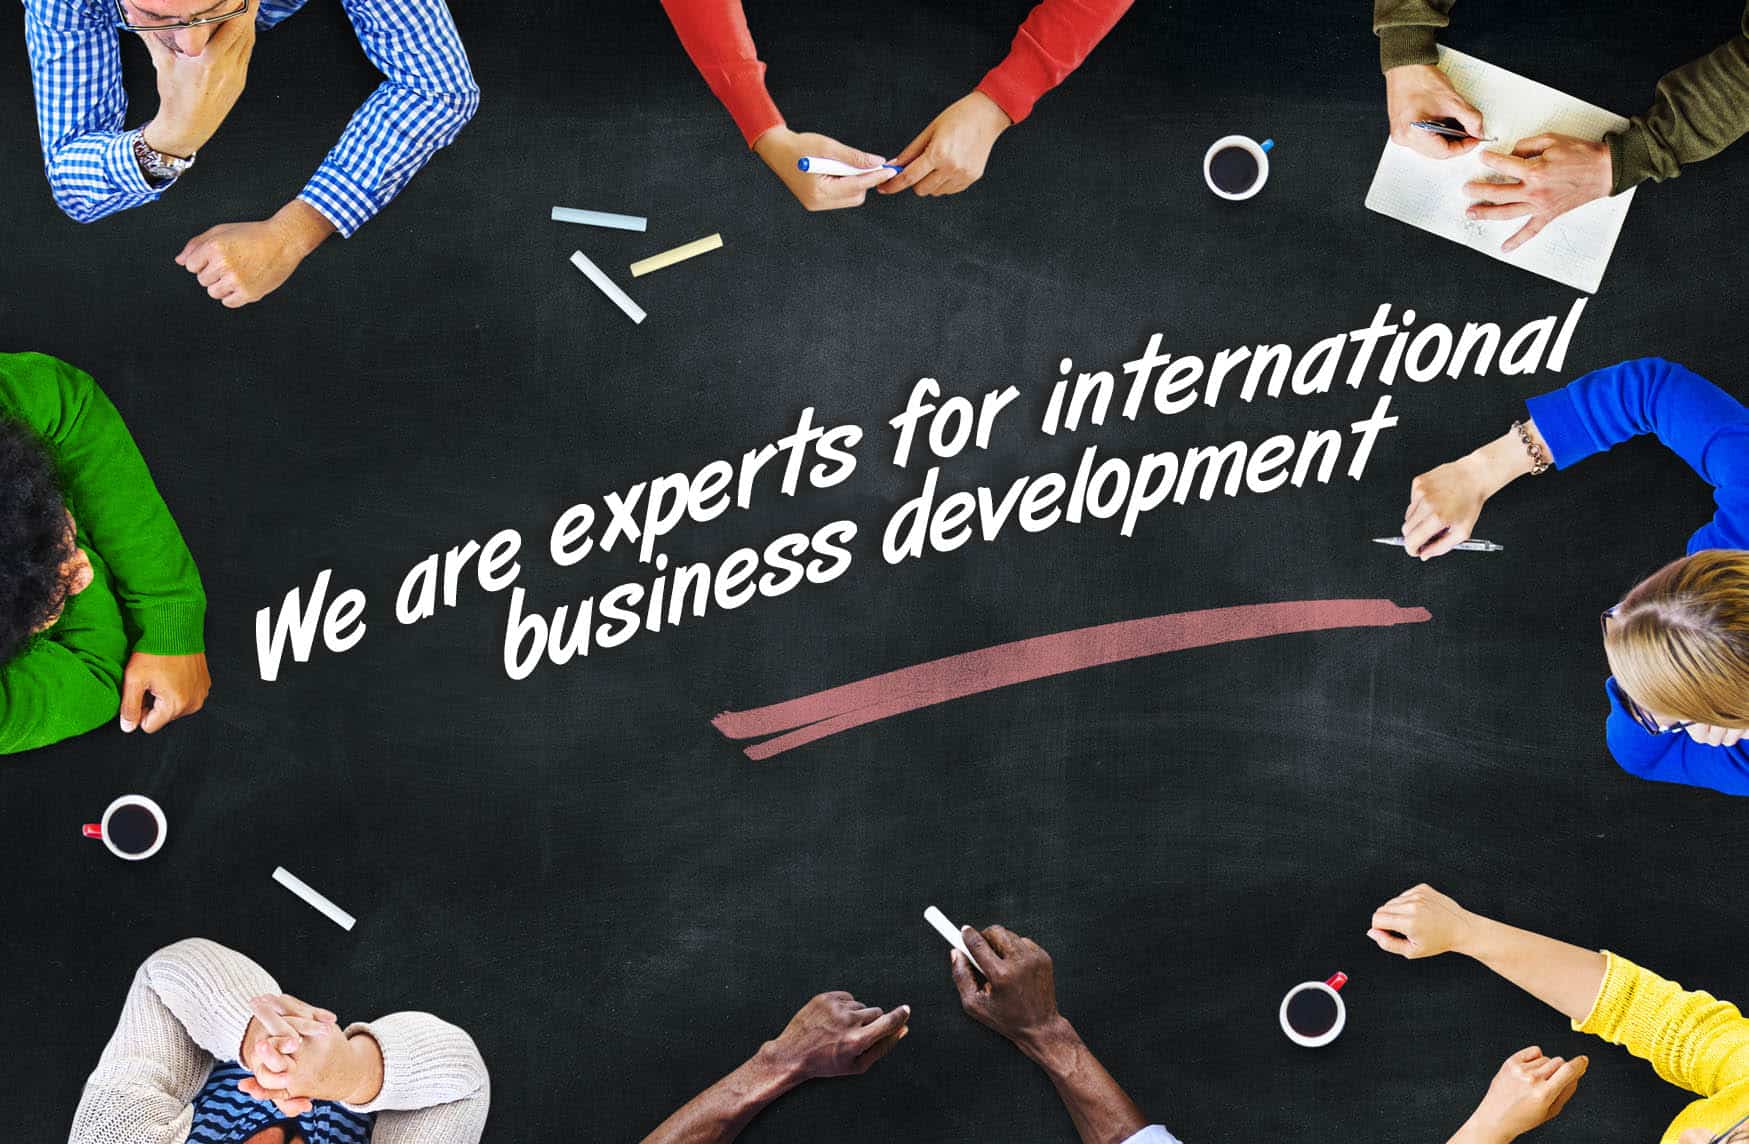 We are experts for international business development